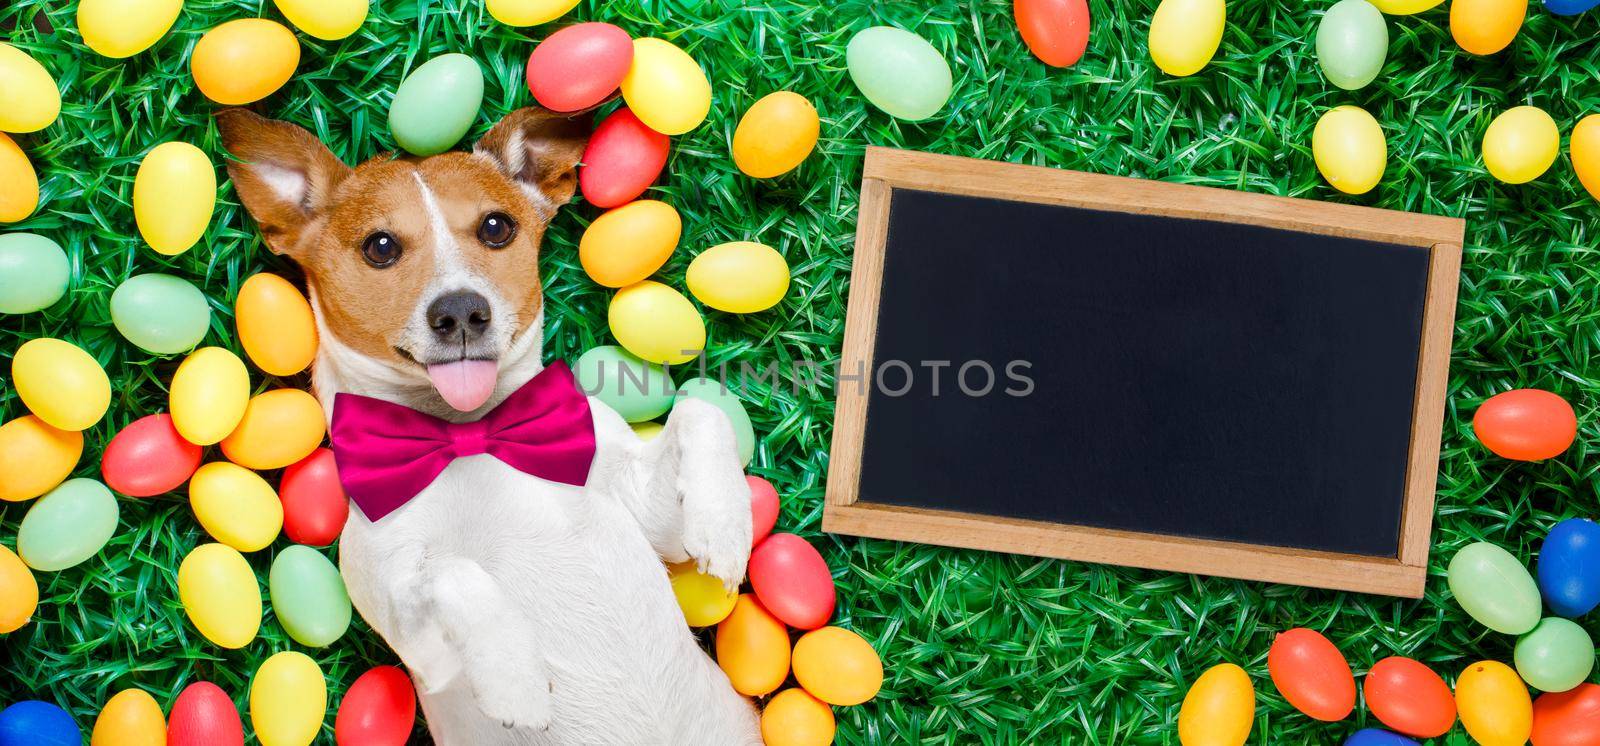 funny jack russell easter bunny  dog with eggs around on grass sticking out tongue with blackboard or banner